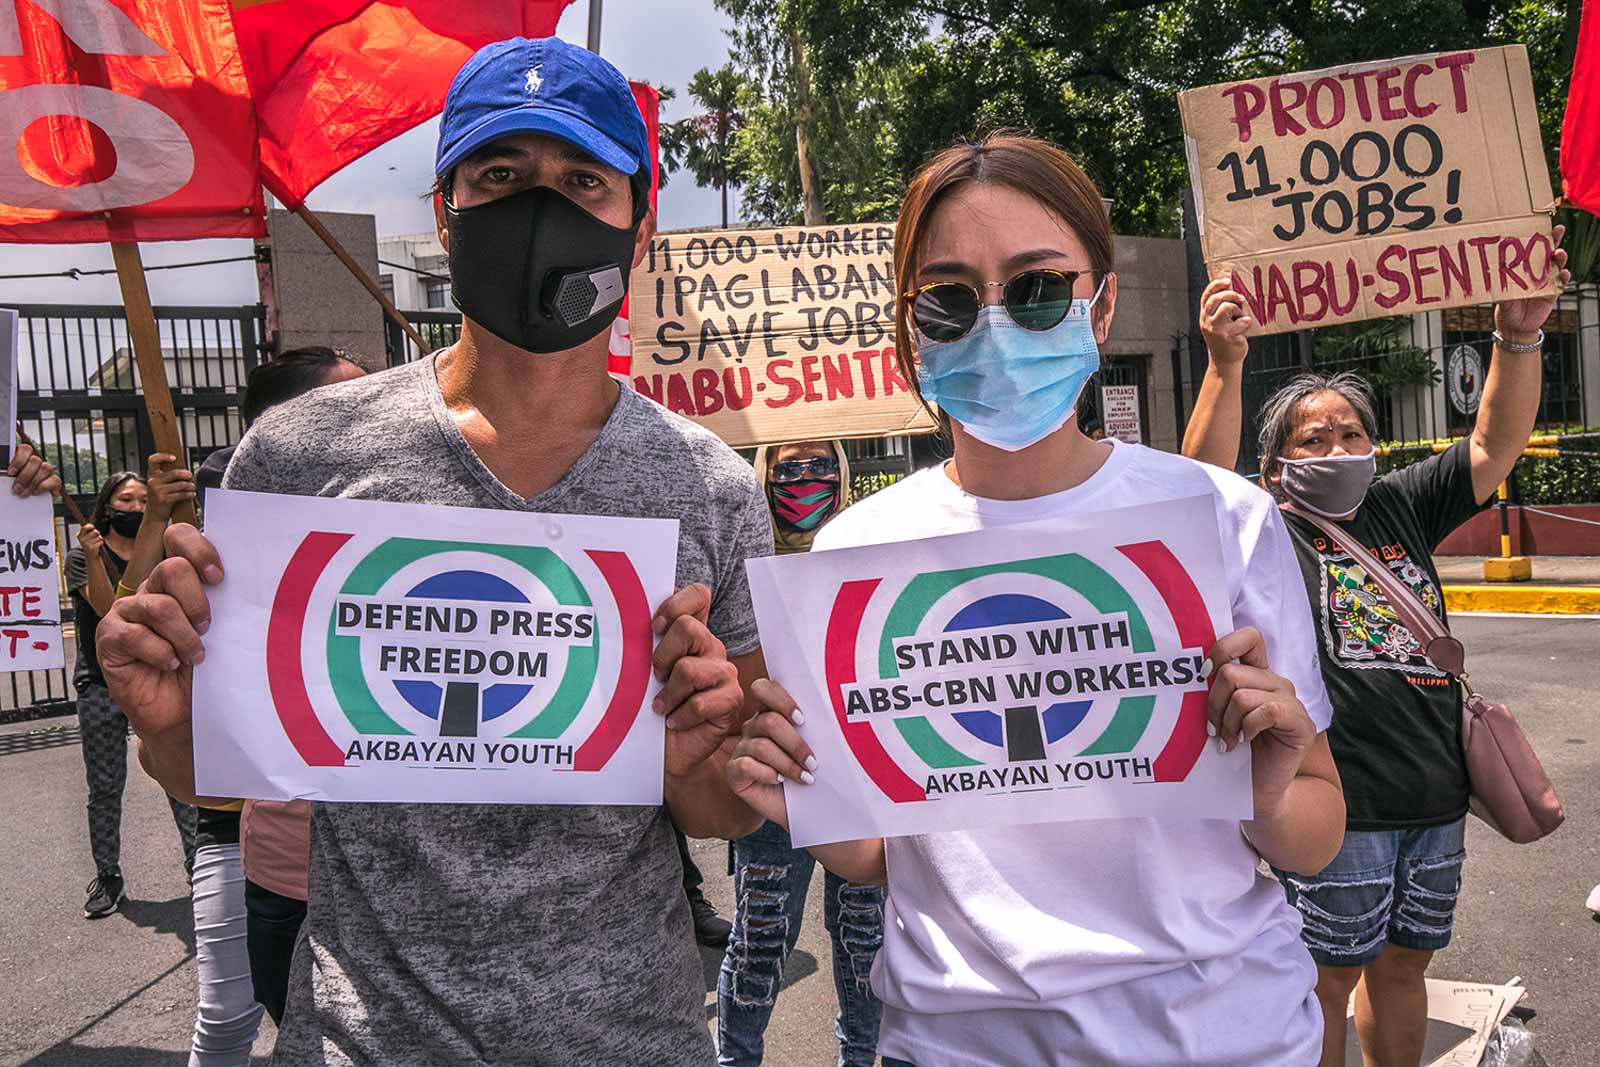 RALLY. Piolo Pascual and Kathryn Bernardo join ABS-CBN workers to call for the approval of the network's franchise. Photo by Darren Langit/Rappler 